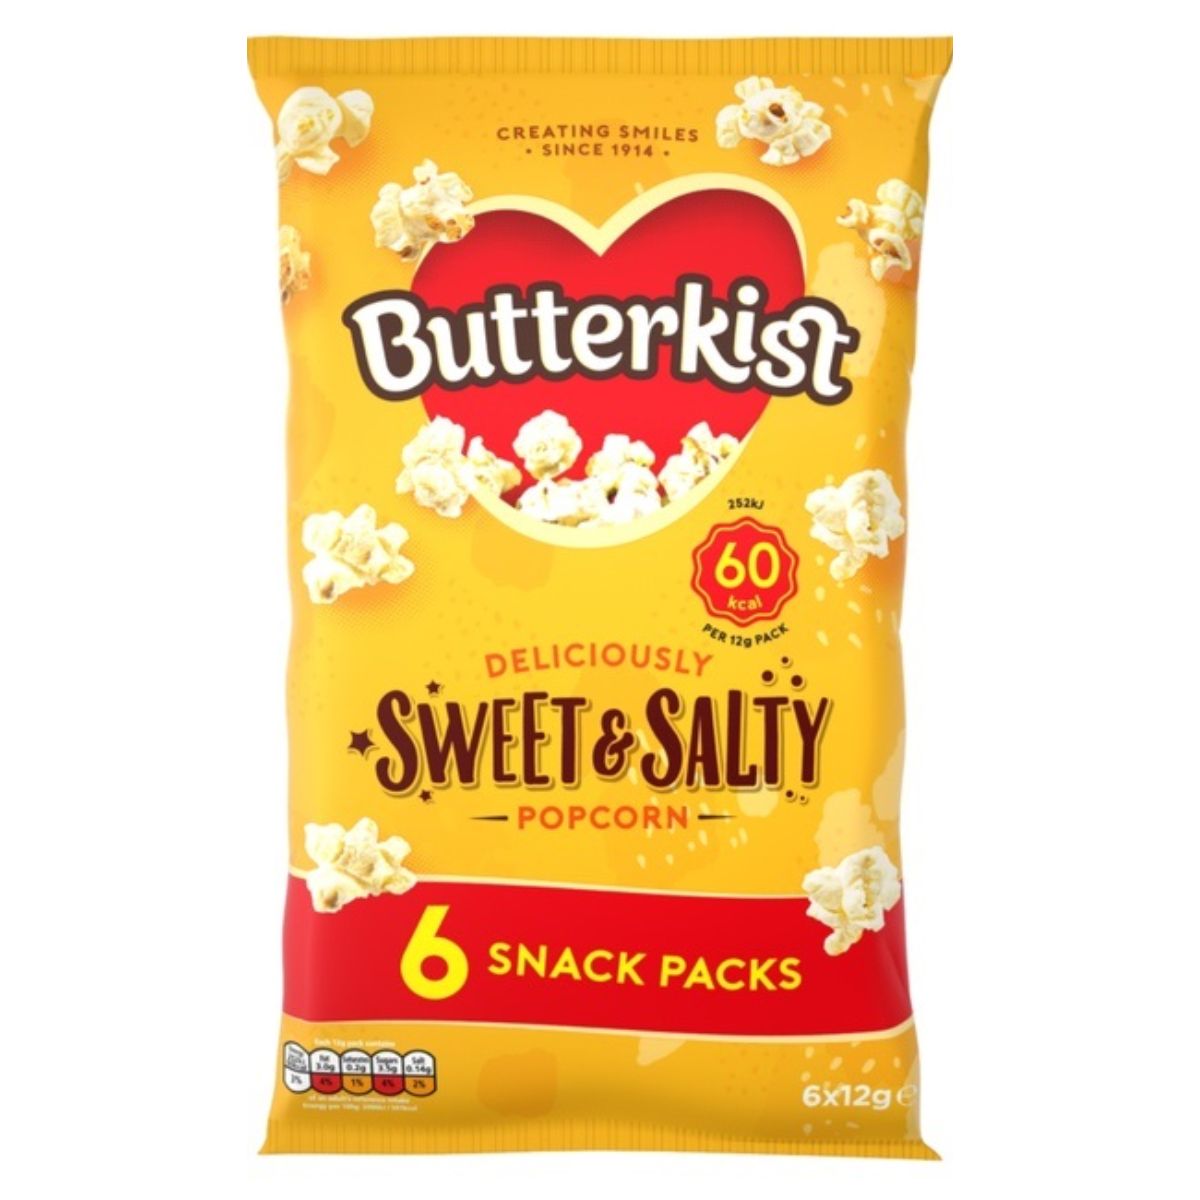 Butterkist - Sweet and Salty Popcorn - 6 x 12g snack packs.